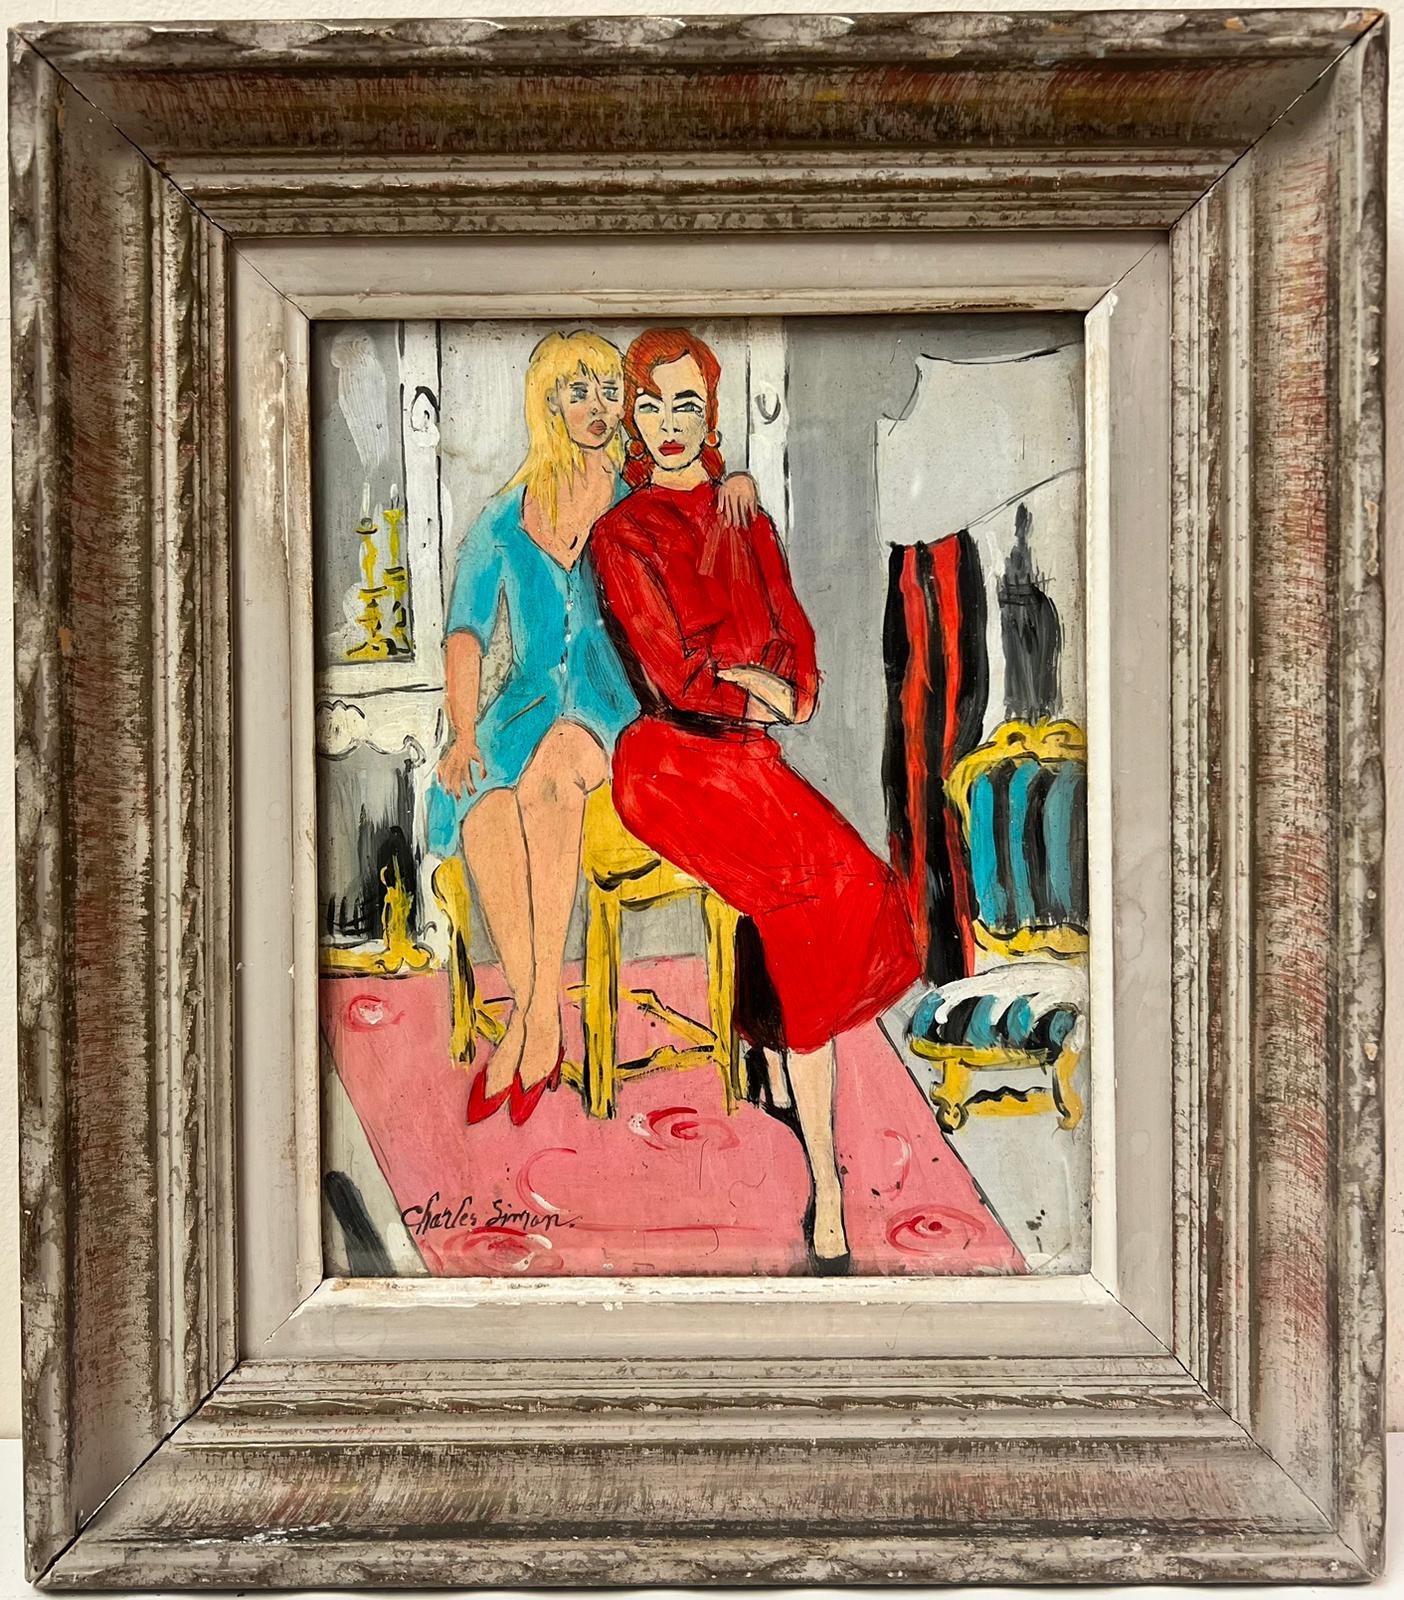 The Fashionable Ladies
French School, circa 1960's
signed 'Charles Simon'
signed oil/ gouache painting on board, framed
framed: 15 x 13 inches
board: 11 x 9 inches
provenance: private collection, France
condition: very good and sound condition 

The